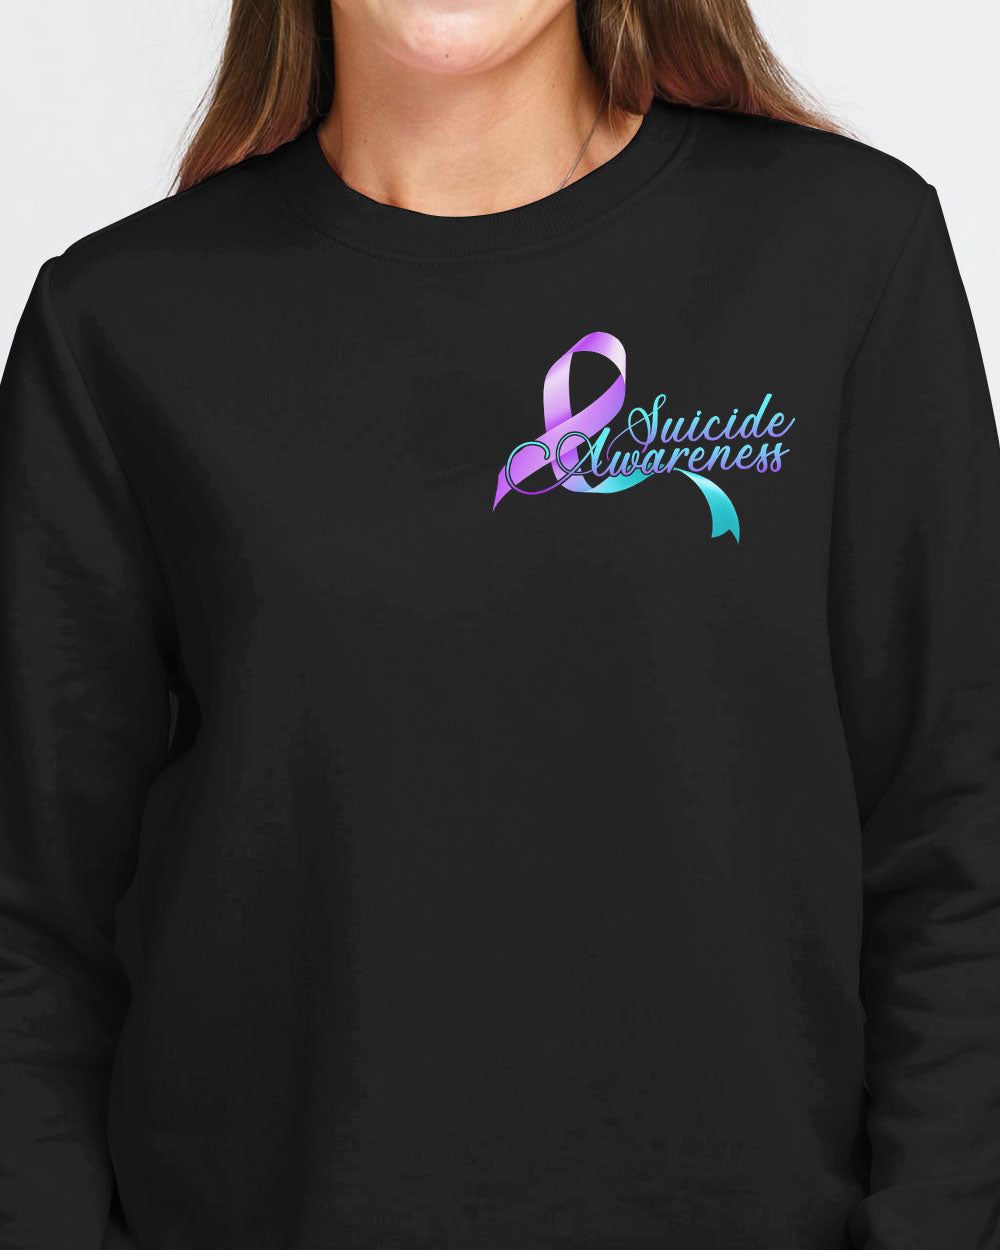 They Whispered To Her You Cannot Withstand The Storm Women's Suicide Prevention Awareness Sweatshirt